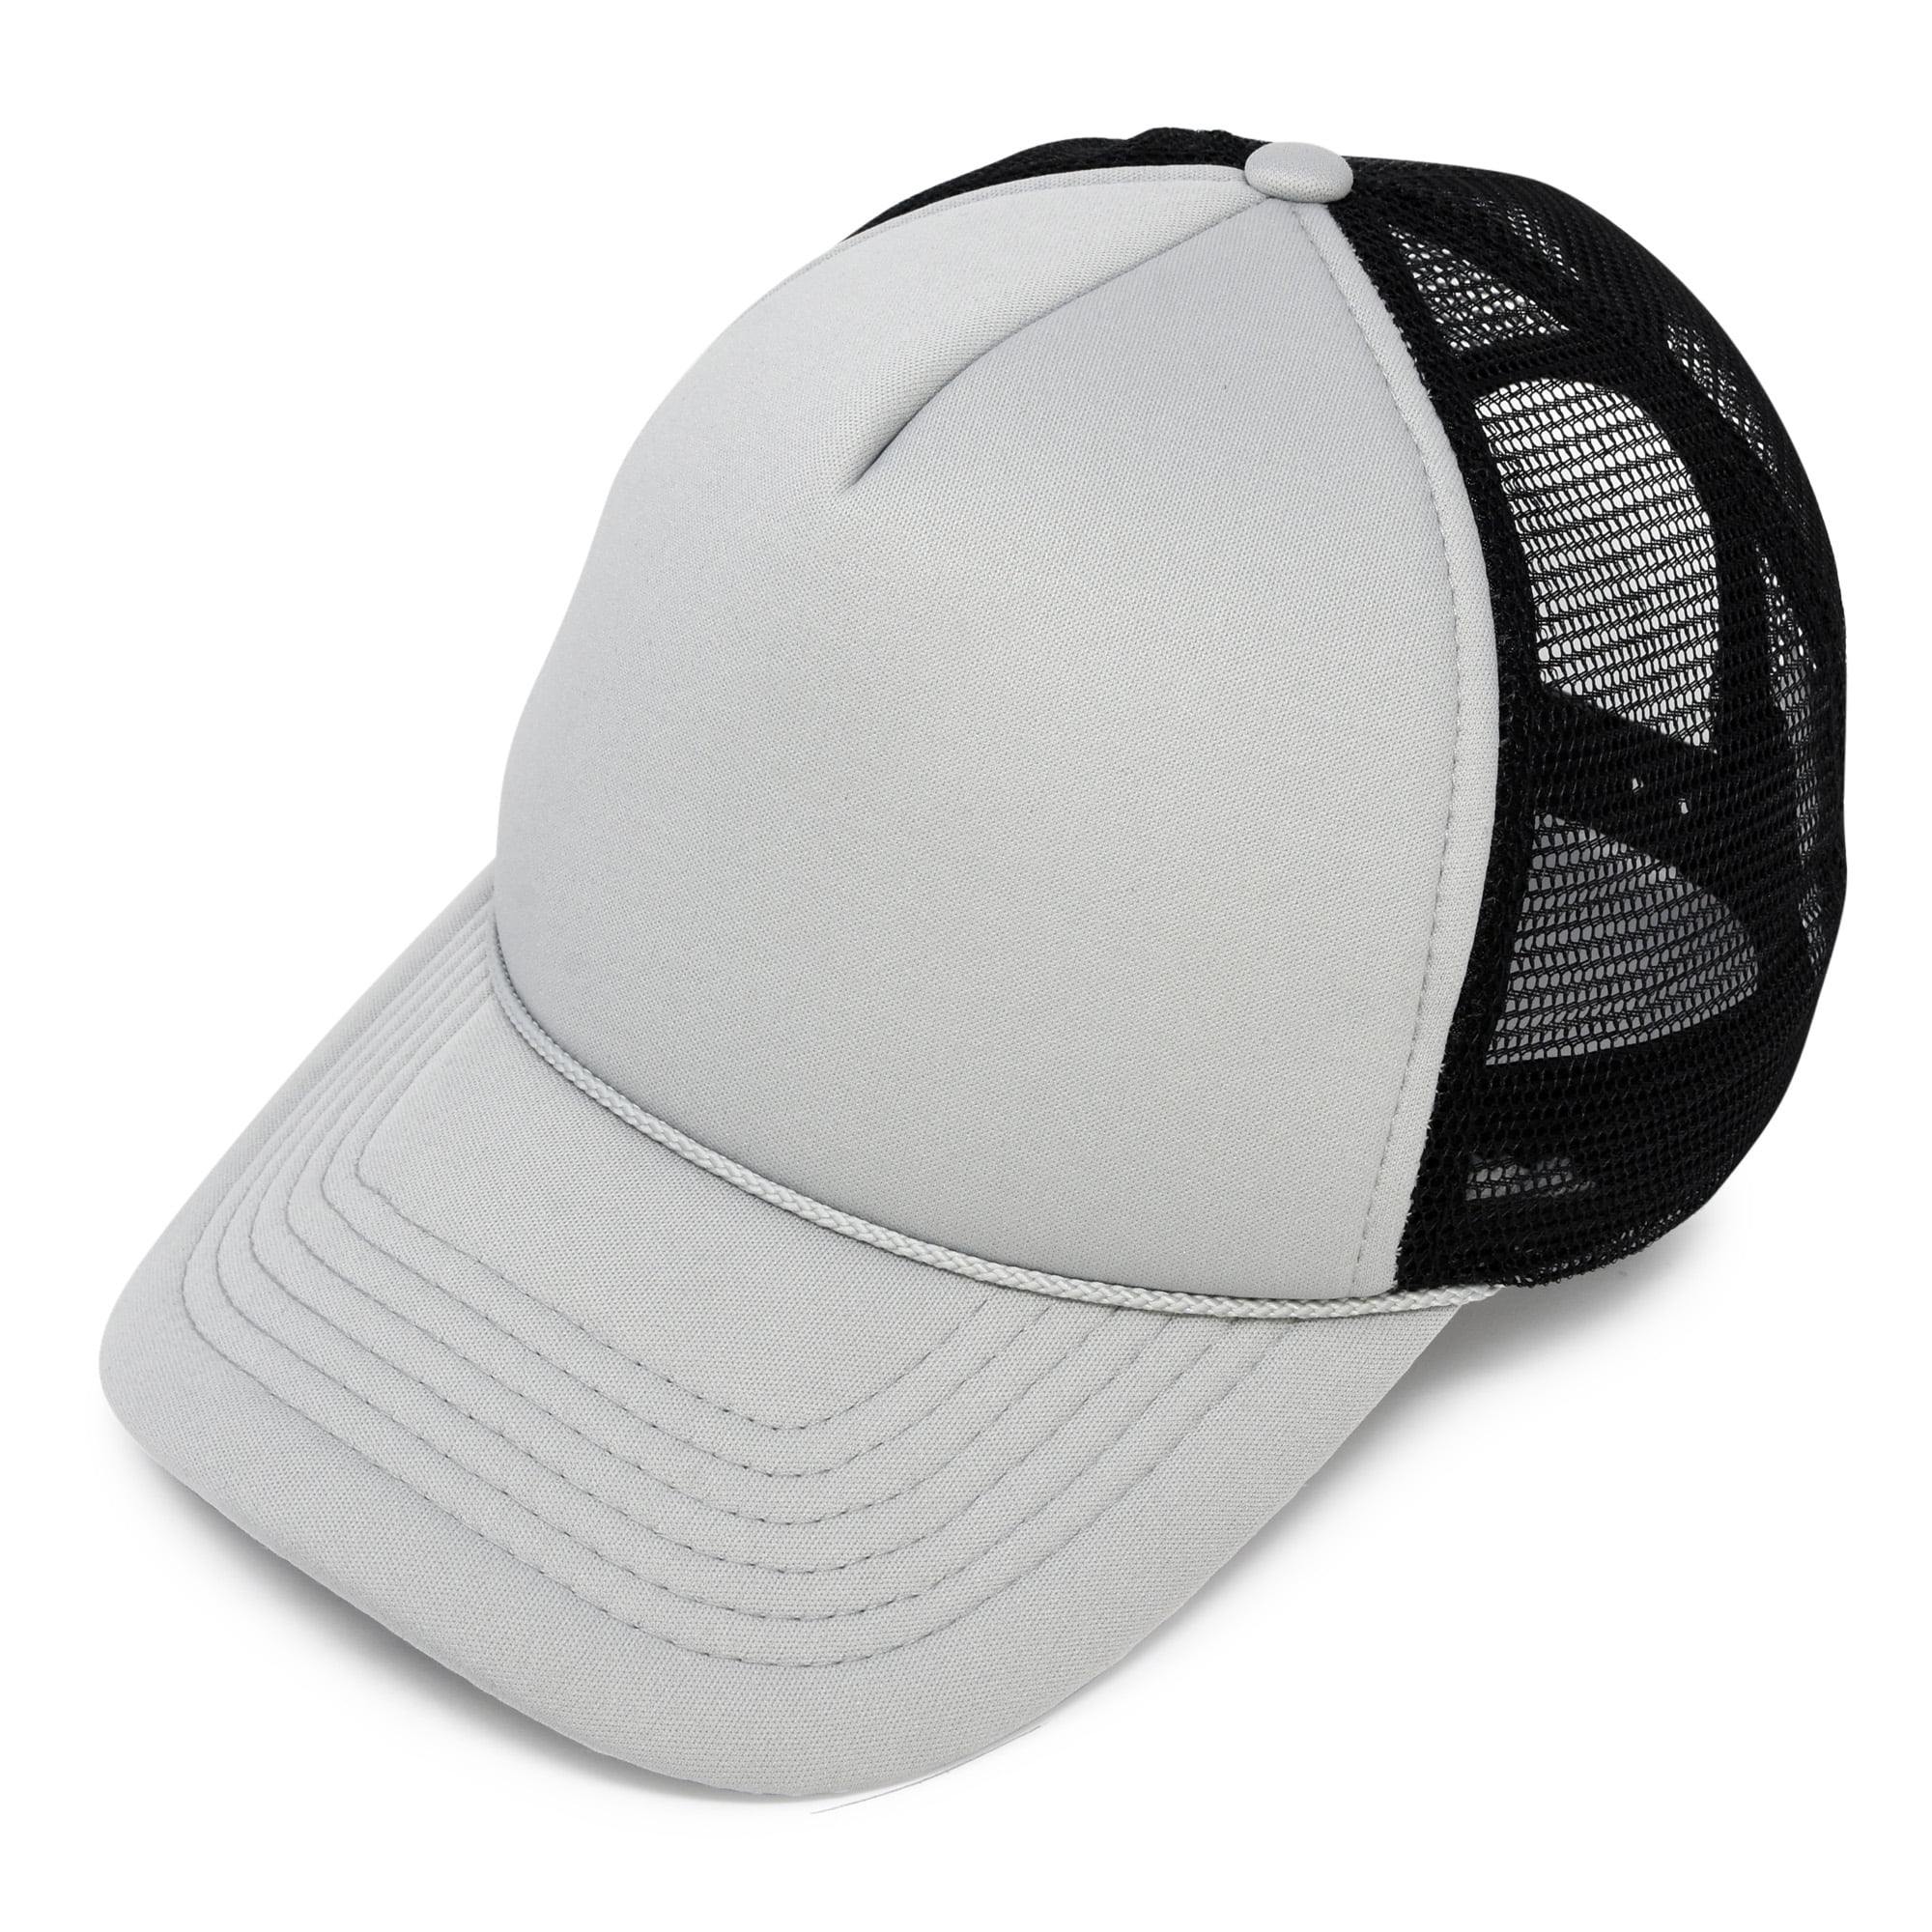 DALIX Two Tone Trucker Hat Summer Mesh Cap with Adjustable Snapback Strap 